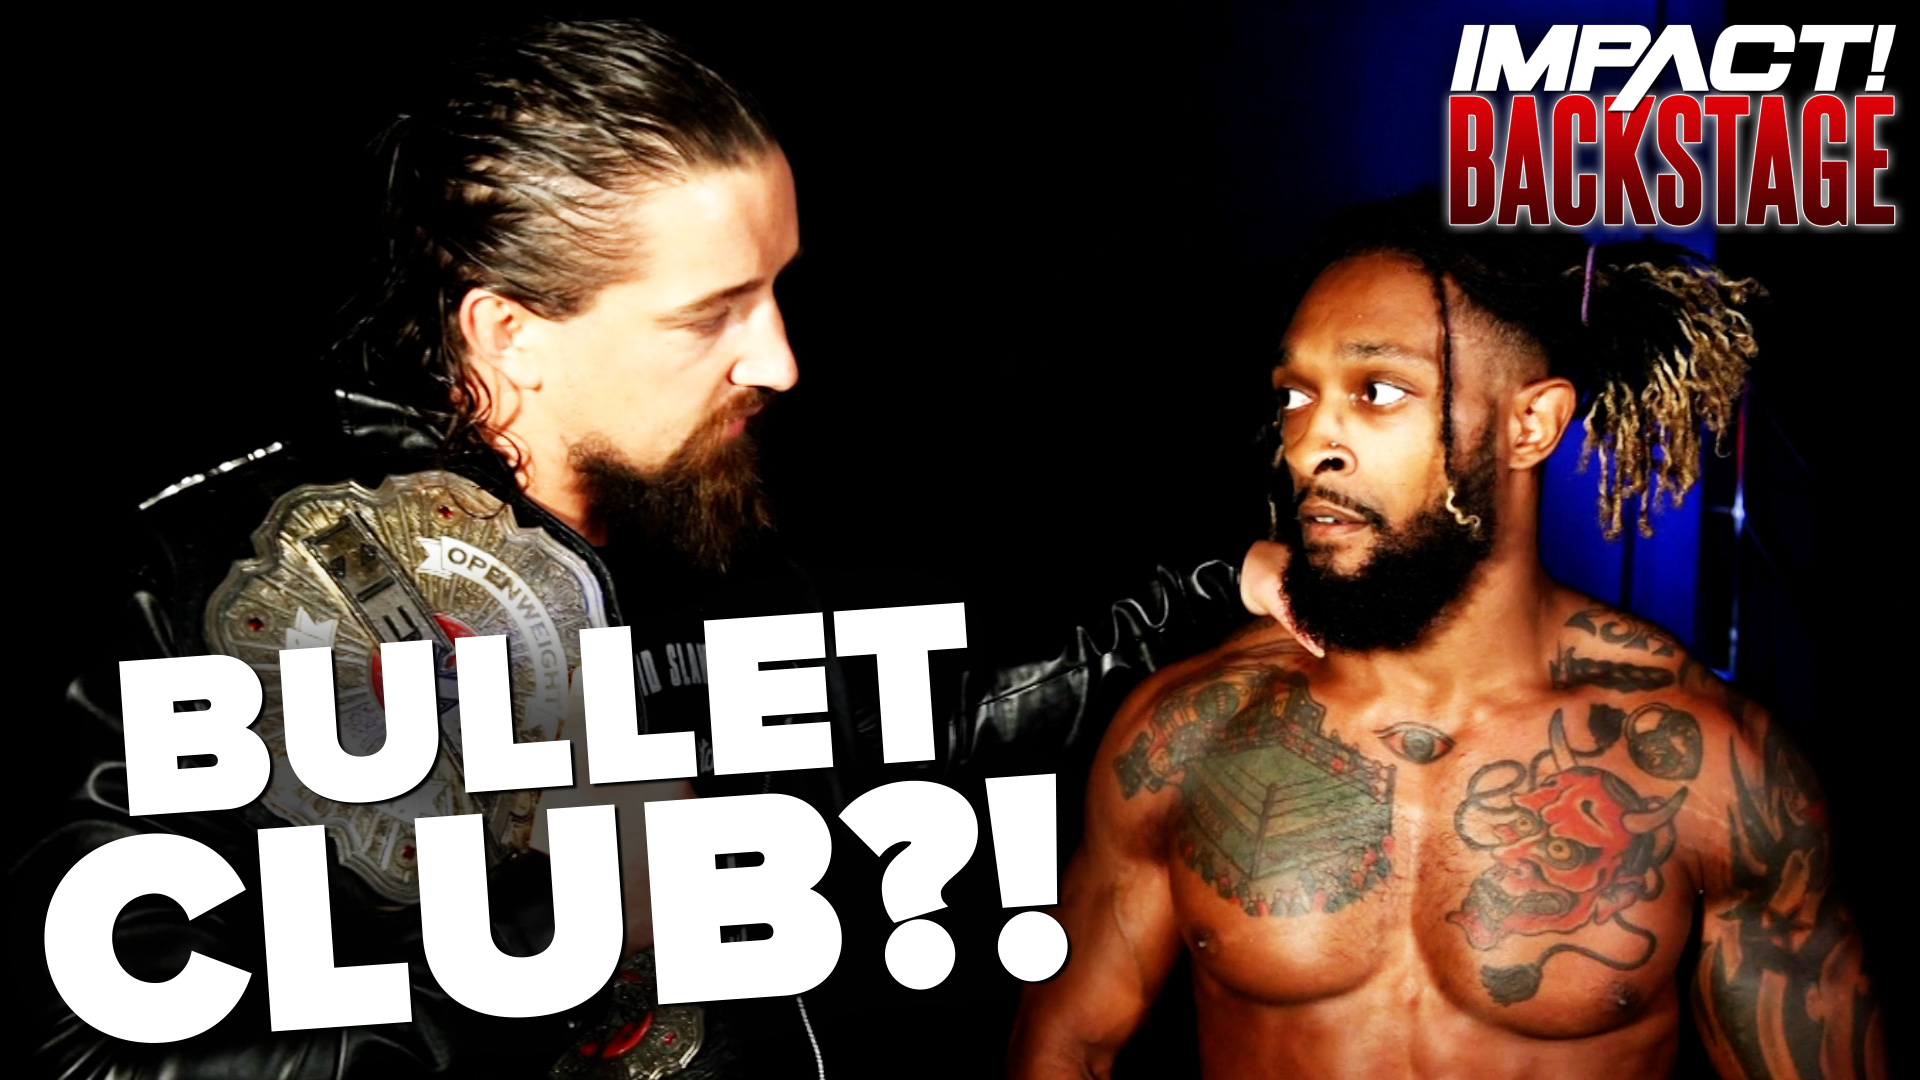 Backstage: Jay White Offers Chris Bey a Spot in the Bullet Club? – IMPACT  Wrestling